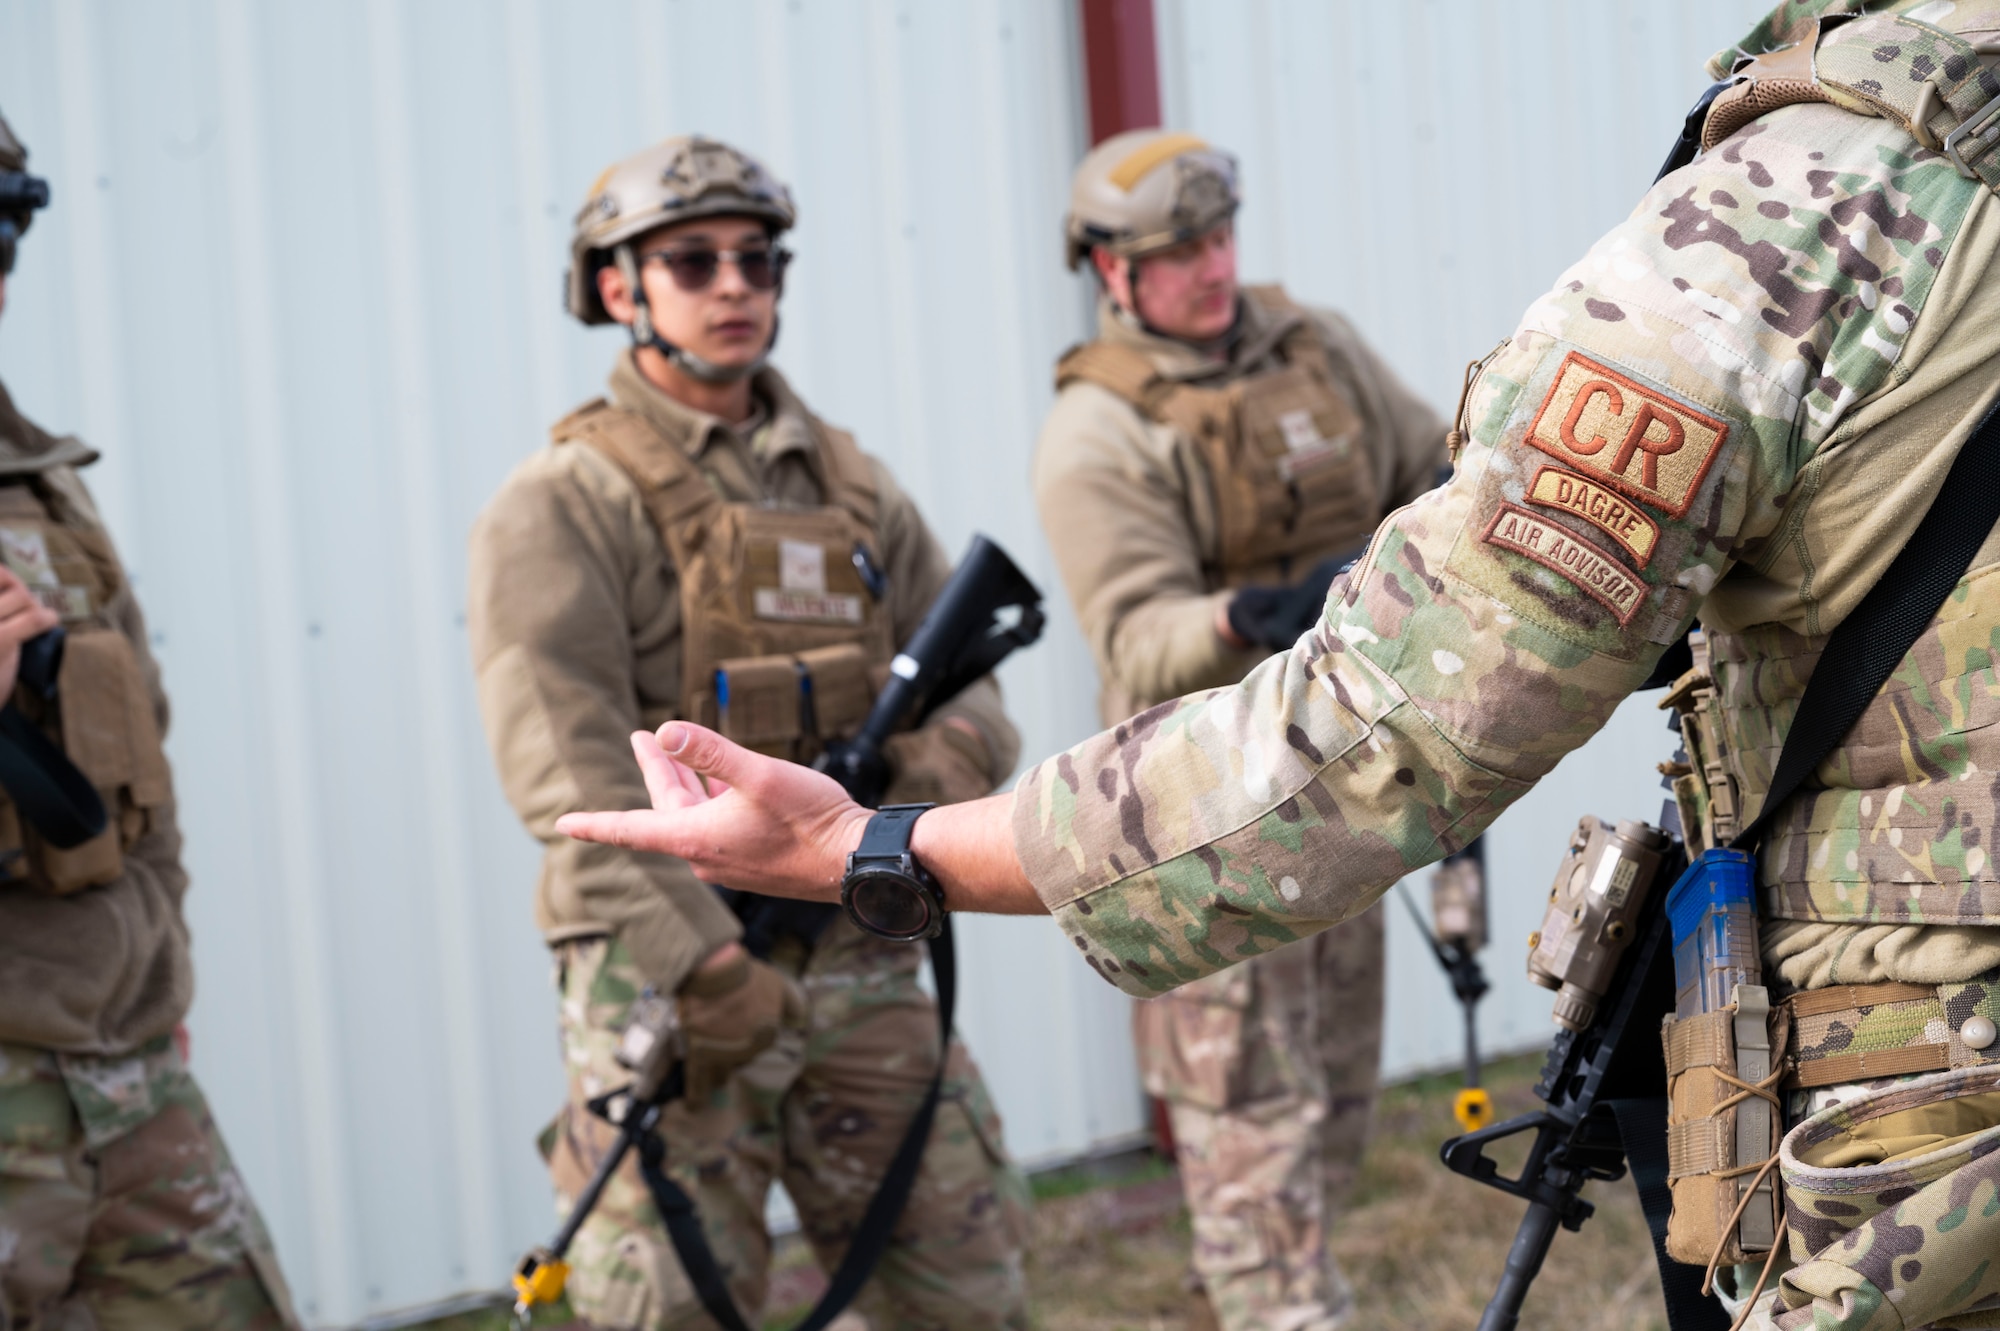 621st CRW members receive training on proper shoot, move and communicate procedures.